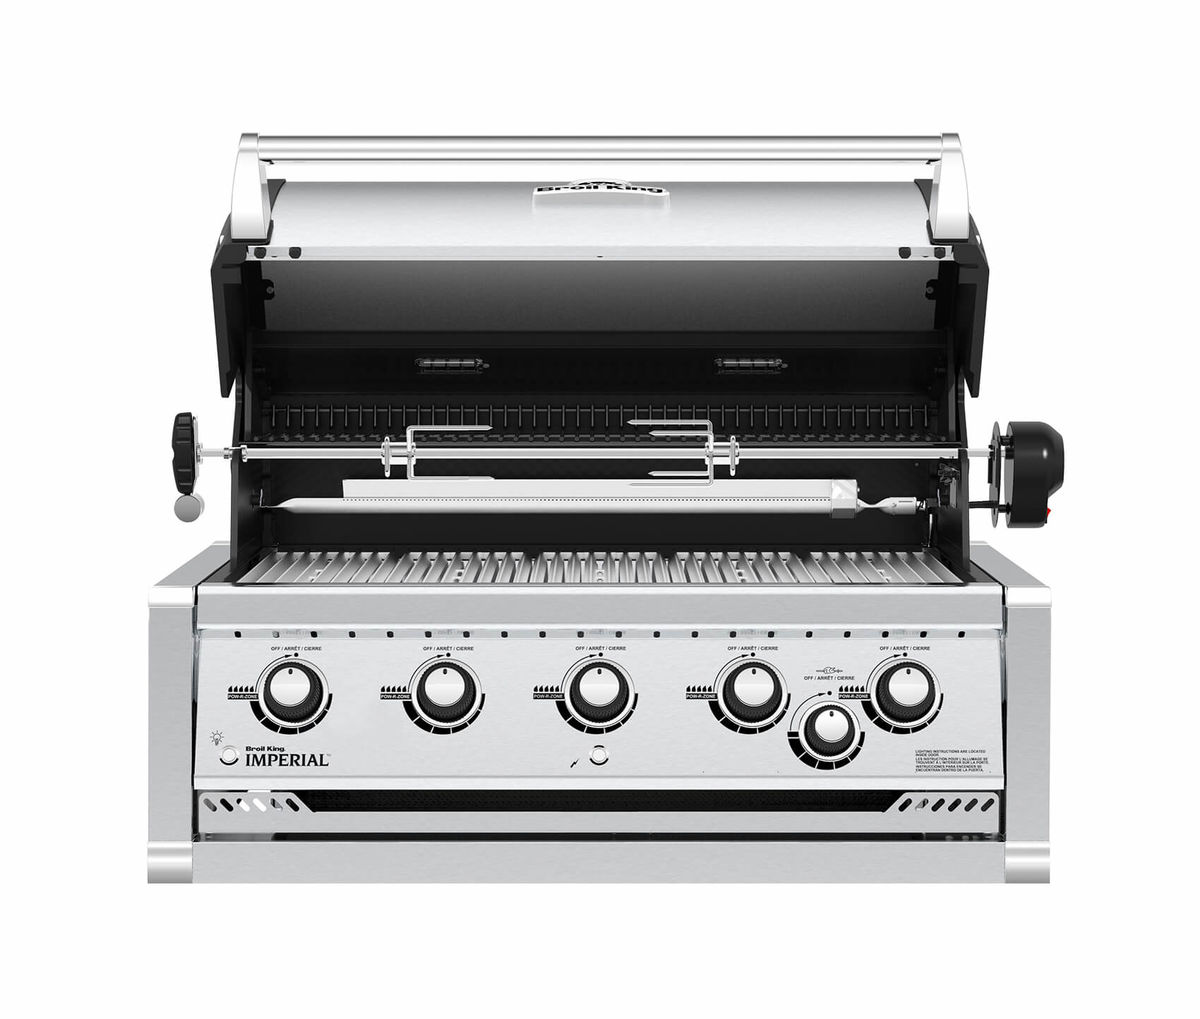 Image of Broil King Imperial S 570 BI Gasgrill bei nettoshop.ch